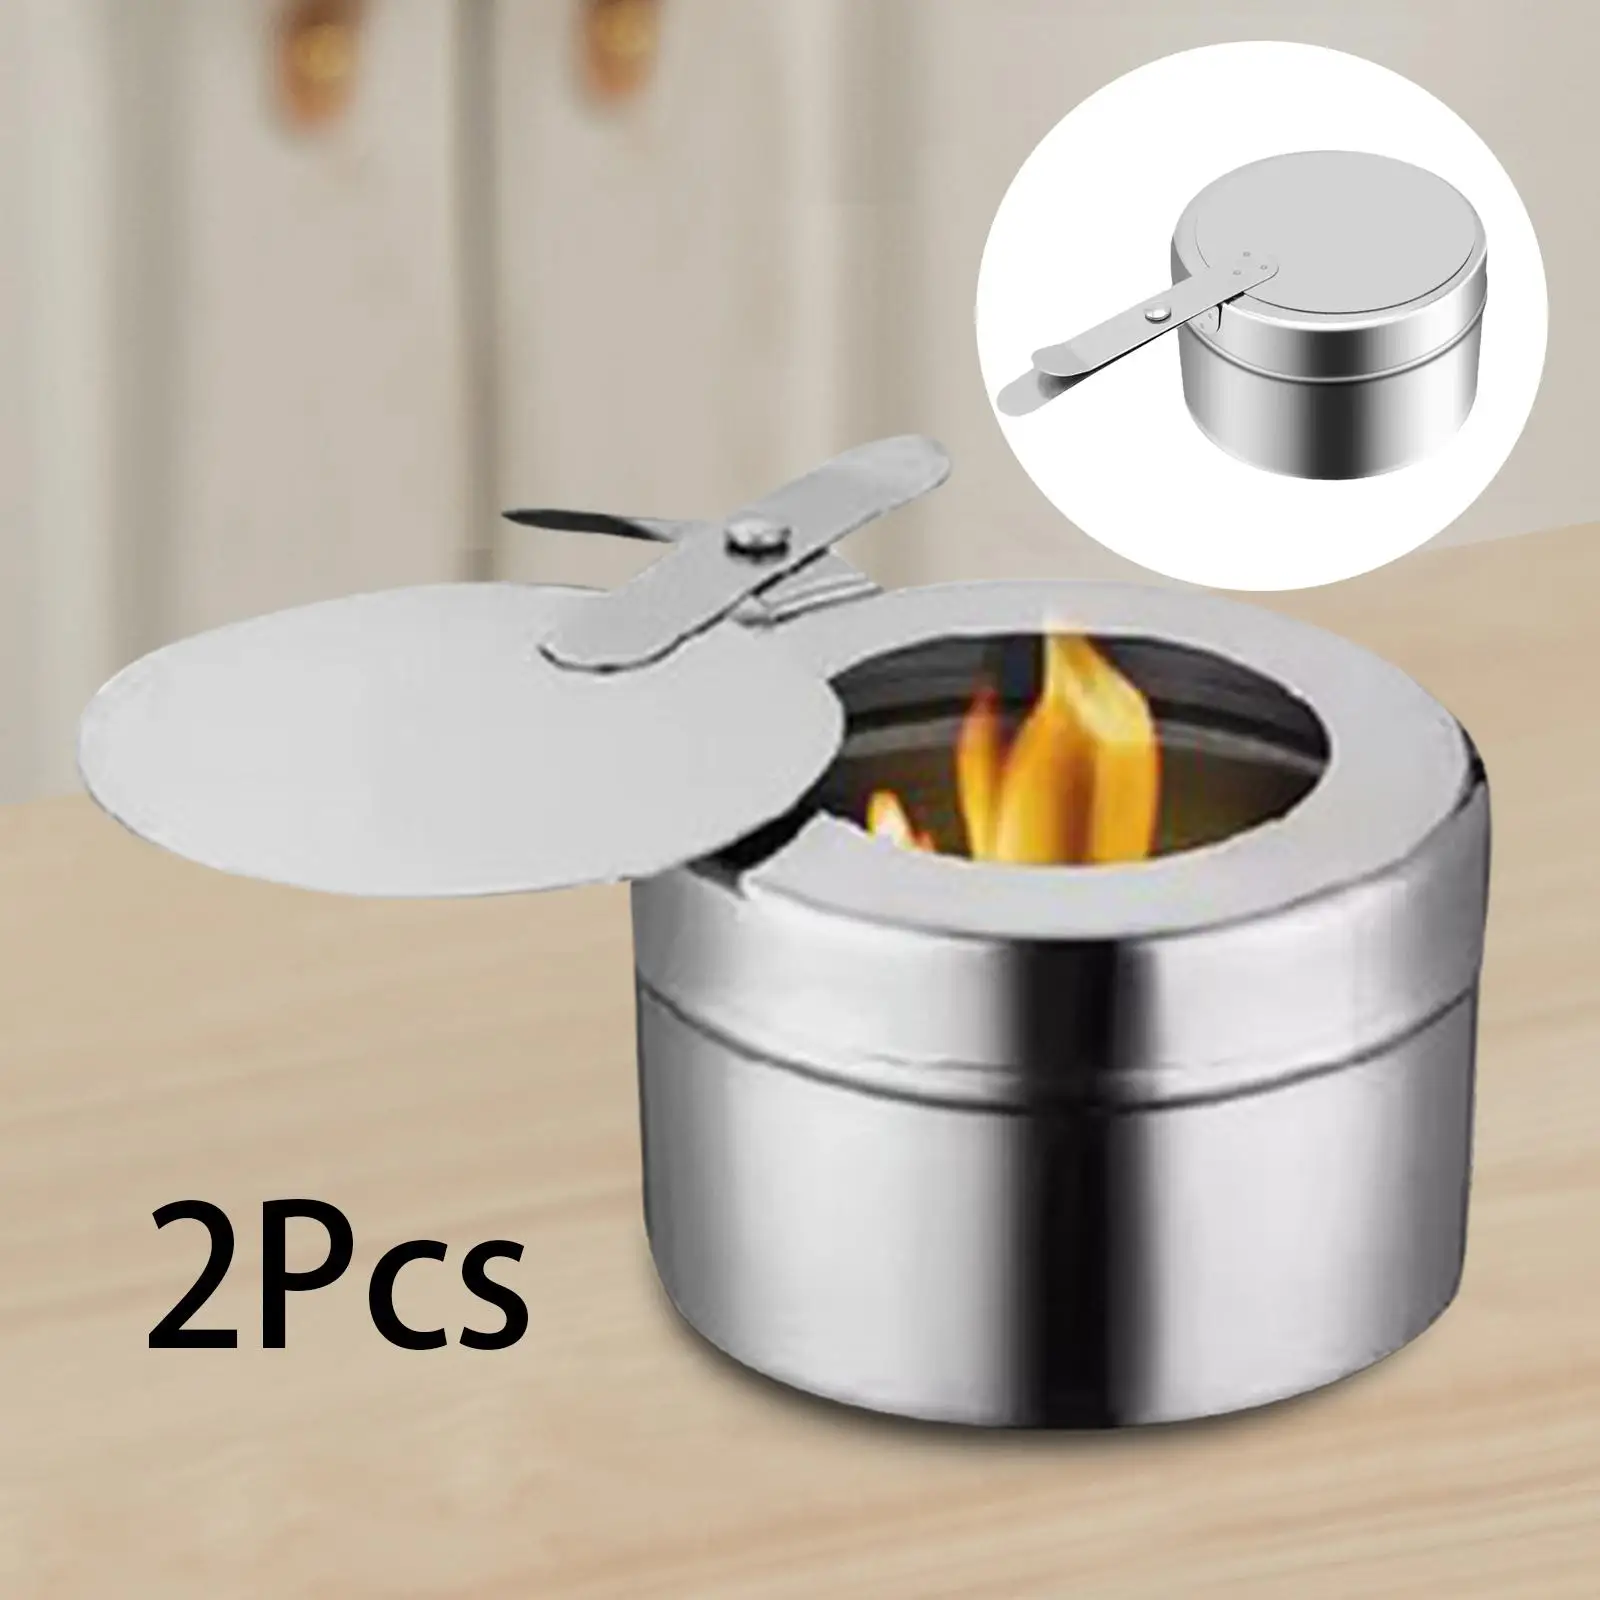 2x Buffet Warmer Warming Trays Heat Fuel Buffet Server Parties Fuel Cans Holder Set for Party Food Warmer Barbecue Buffet Server